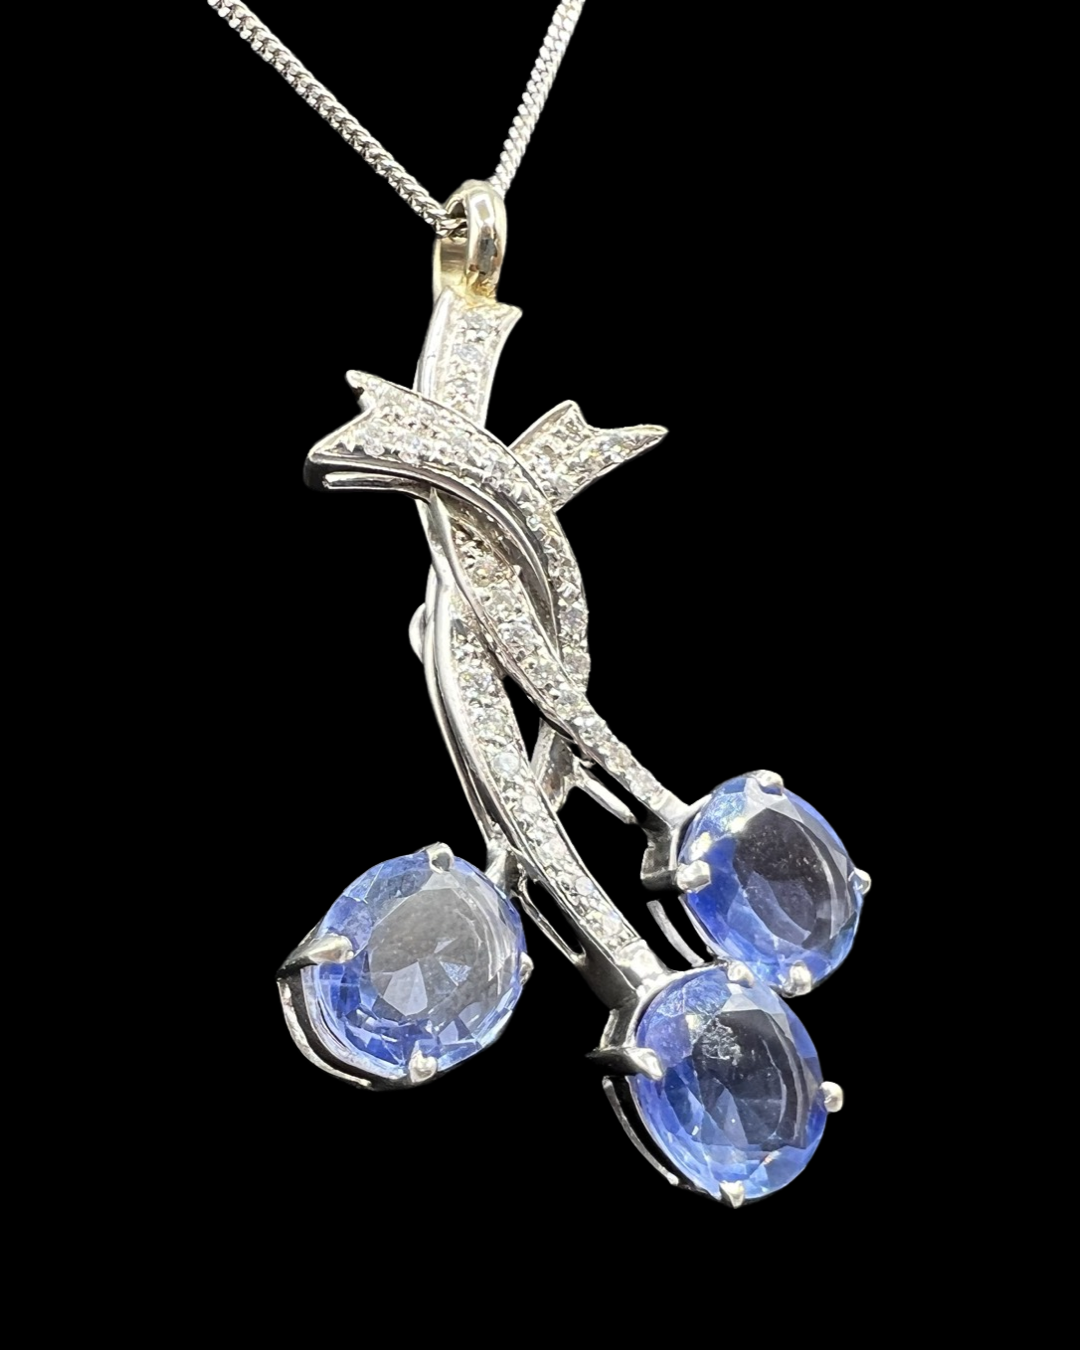 18ct White Gold Diamond & Sapphire Flower Spray Pendant & Necklace 41cm in length - Very Good - Image 2 of 2